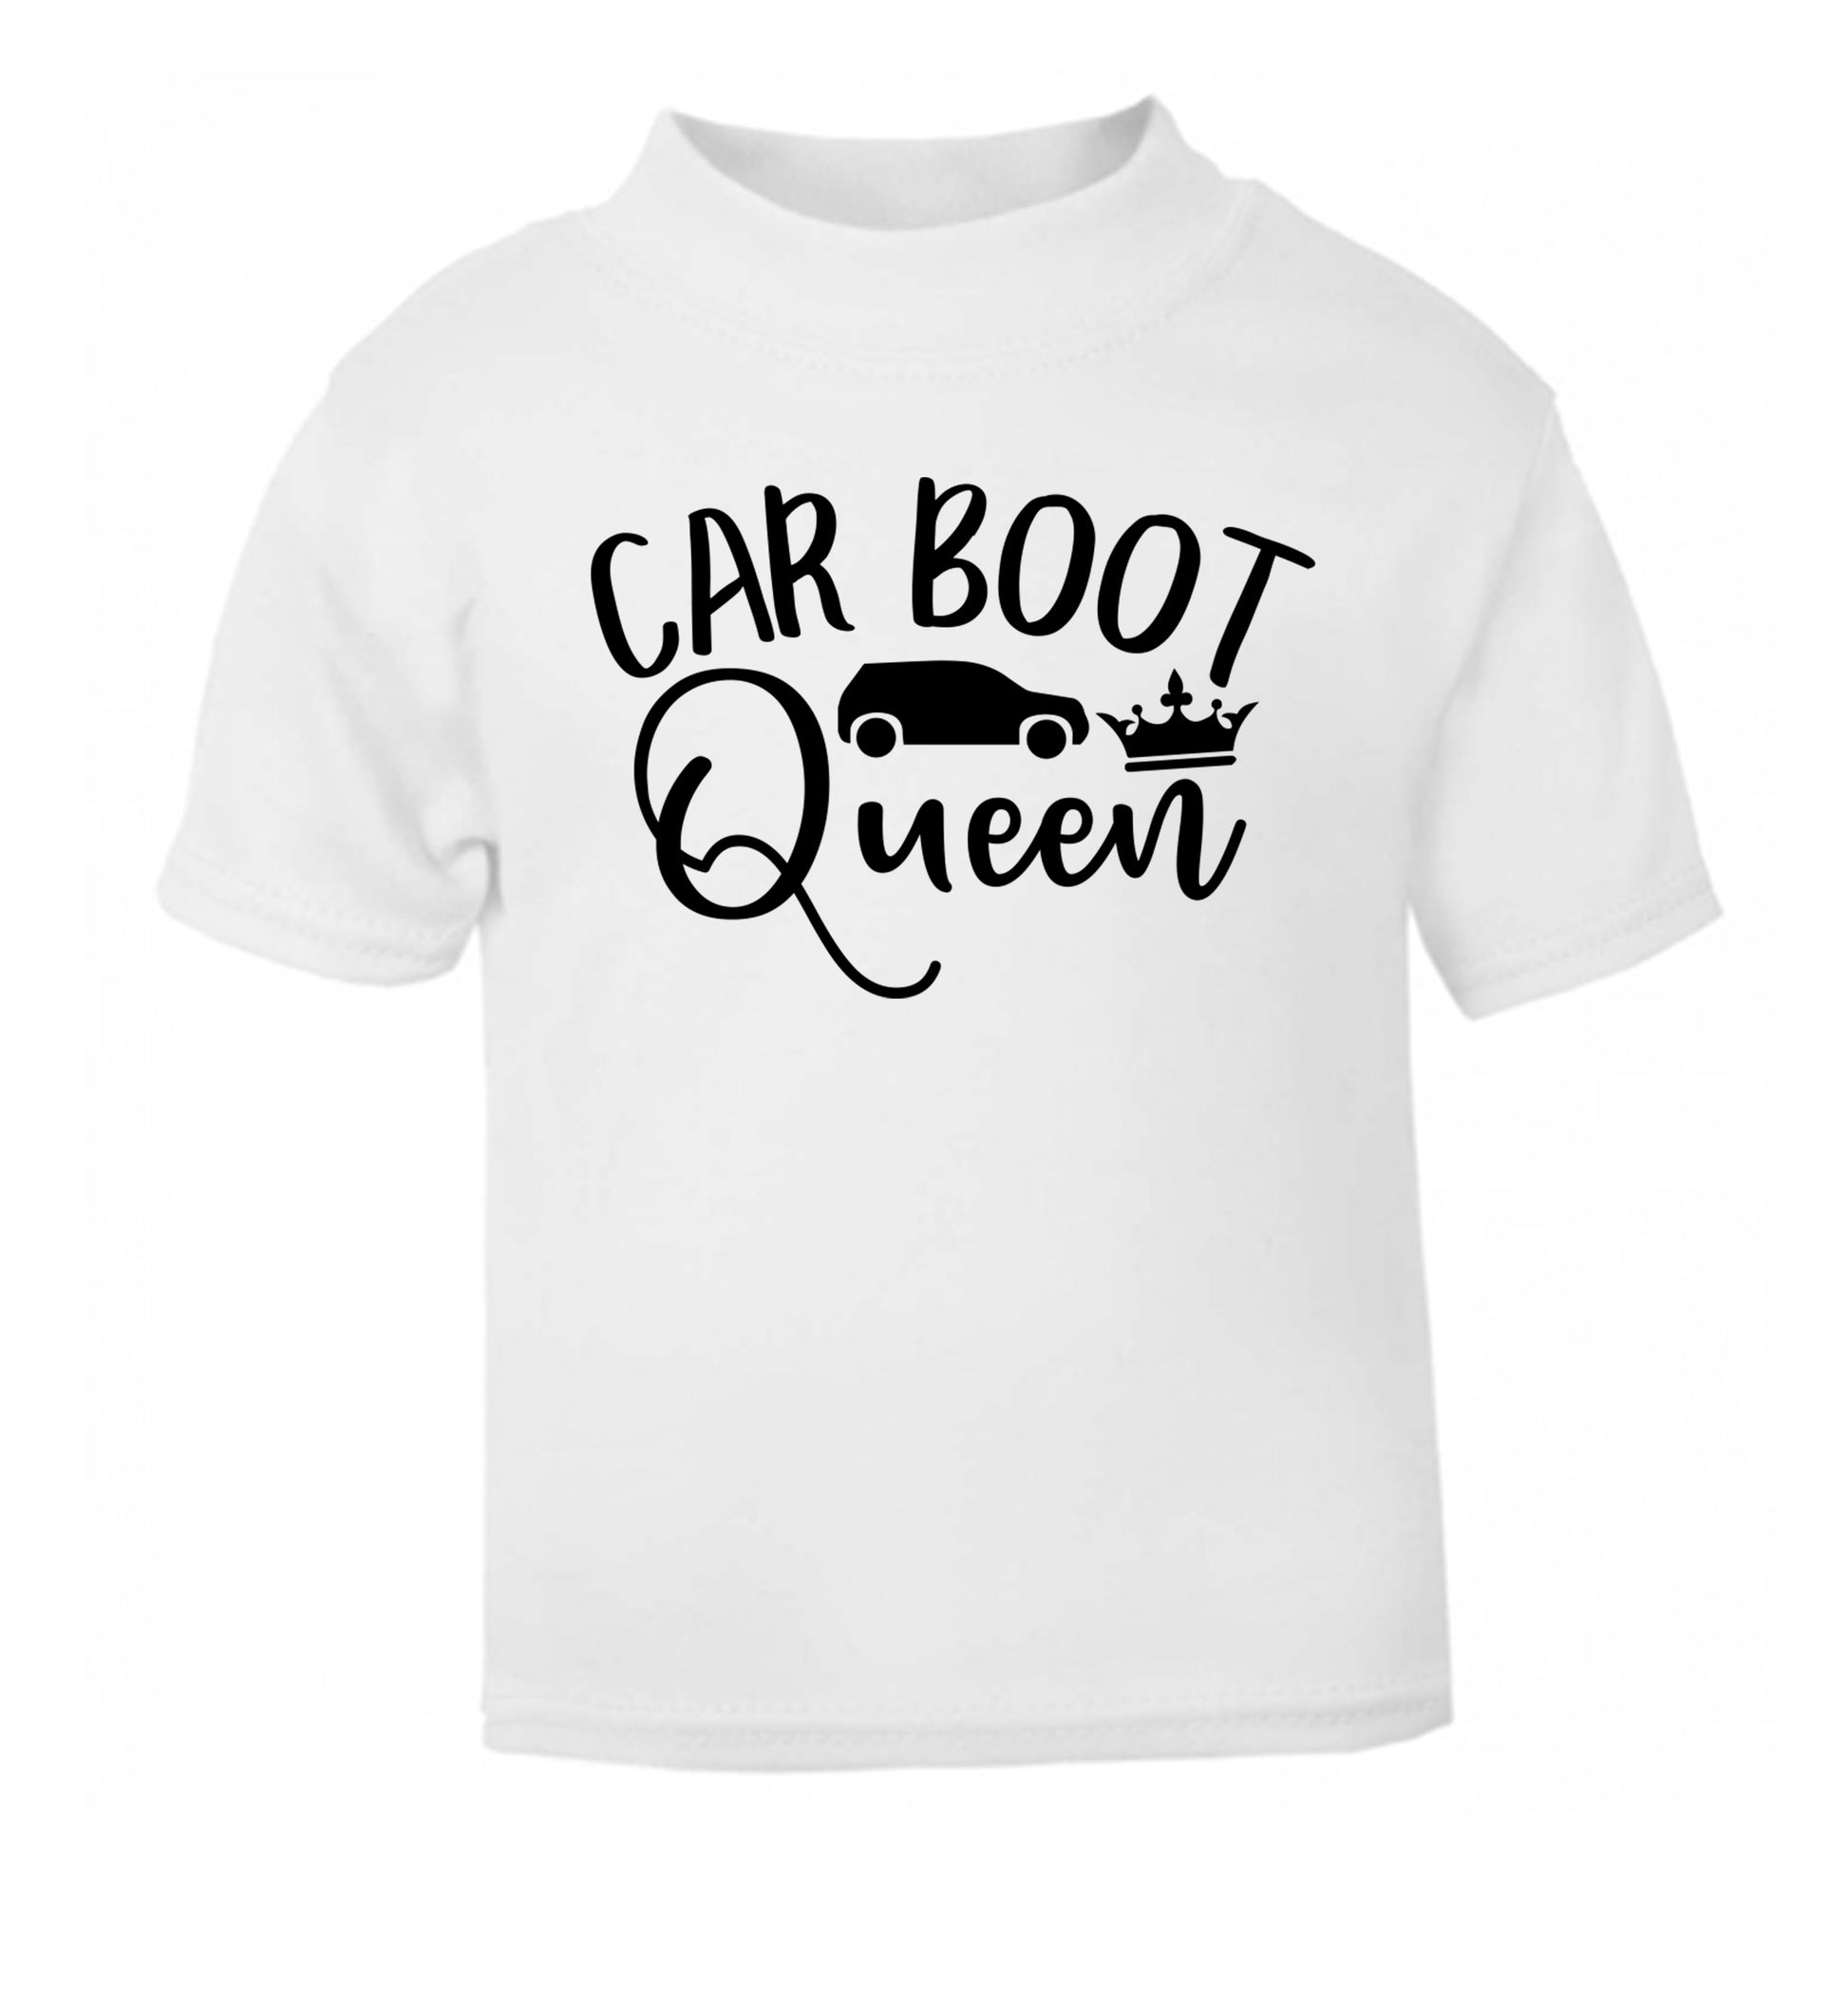 Carboot Queen white Baby Toddler Tshirt 2 Years